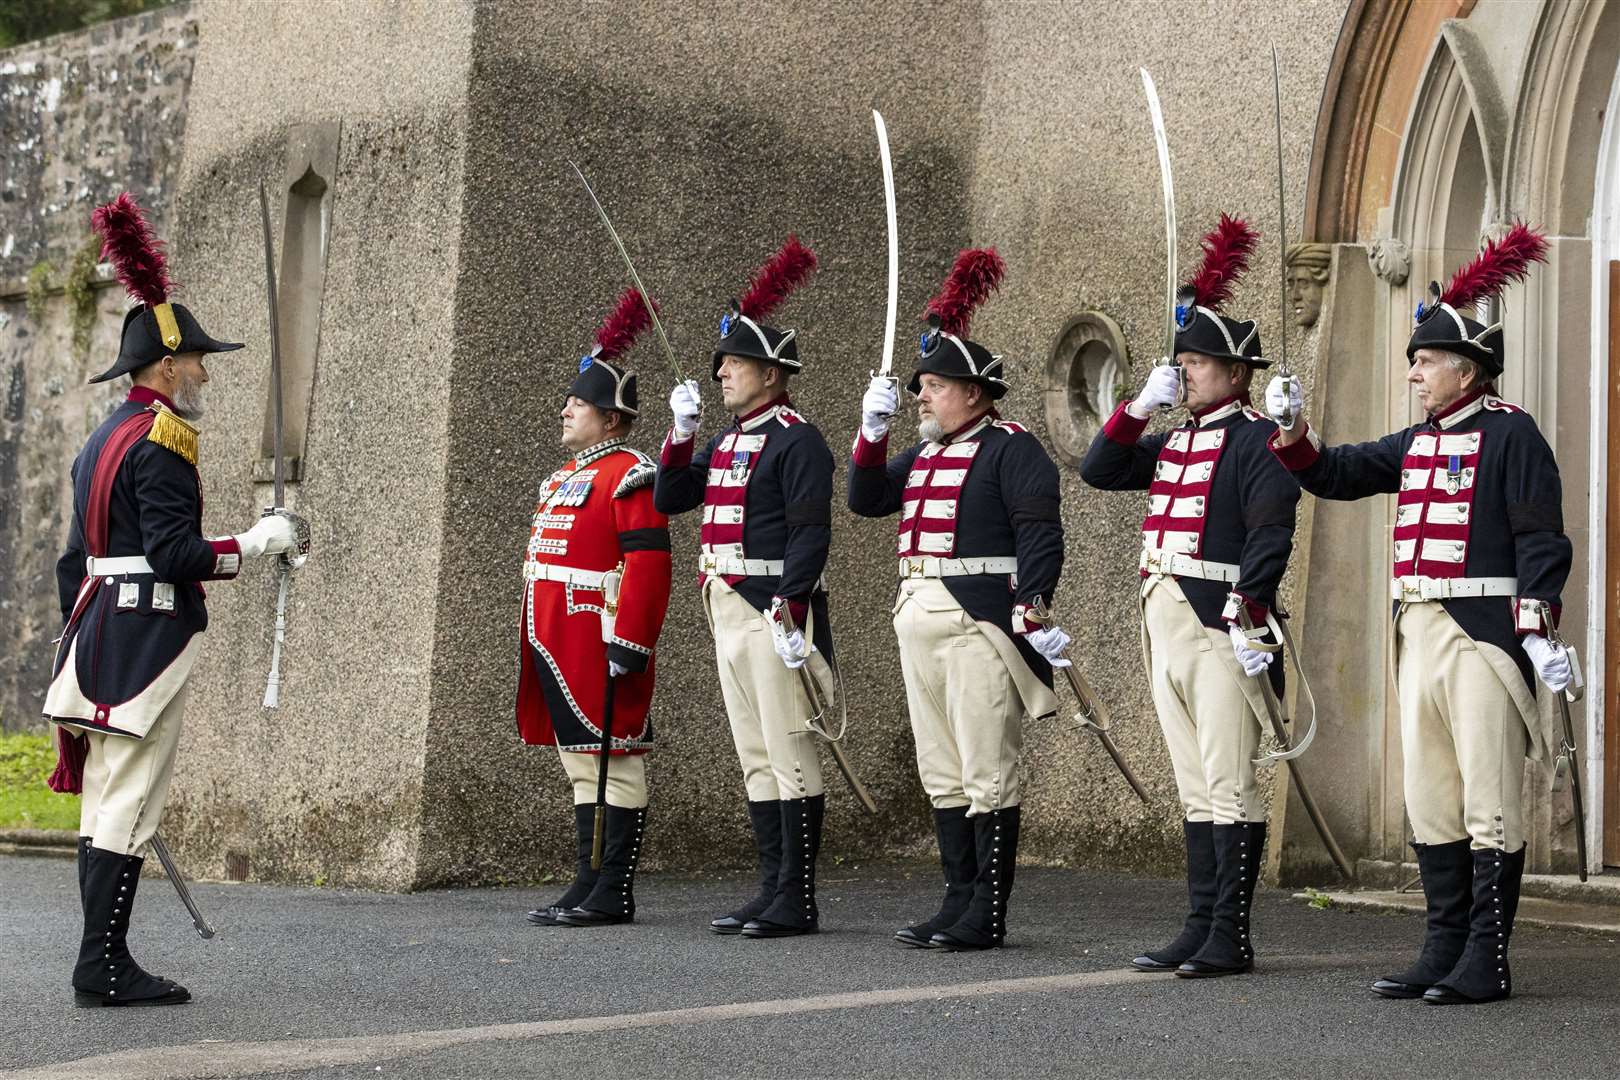 Hillsborough Fort Guard during a remembrance service for Queen Elizabeth II at Hillsborough Fort in Northern Ireland (Liam McBurney/PA)